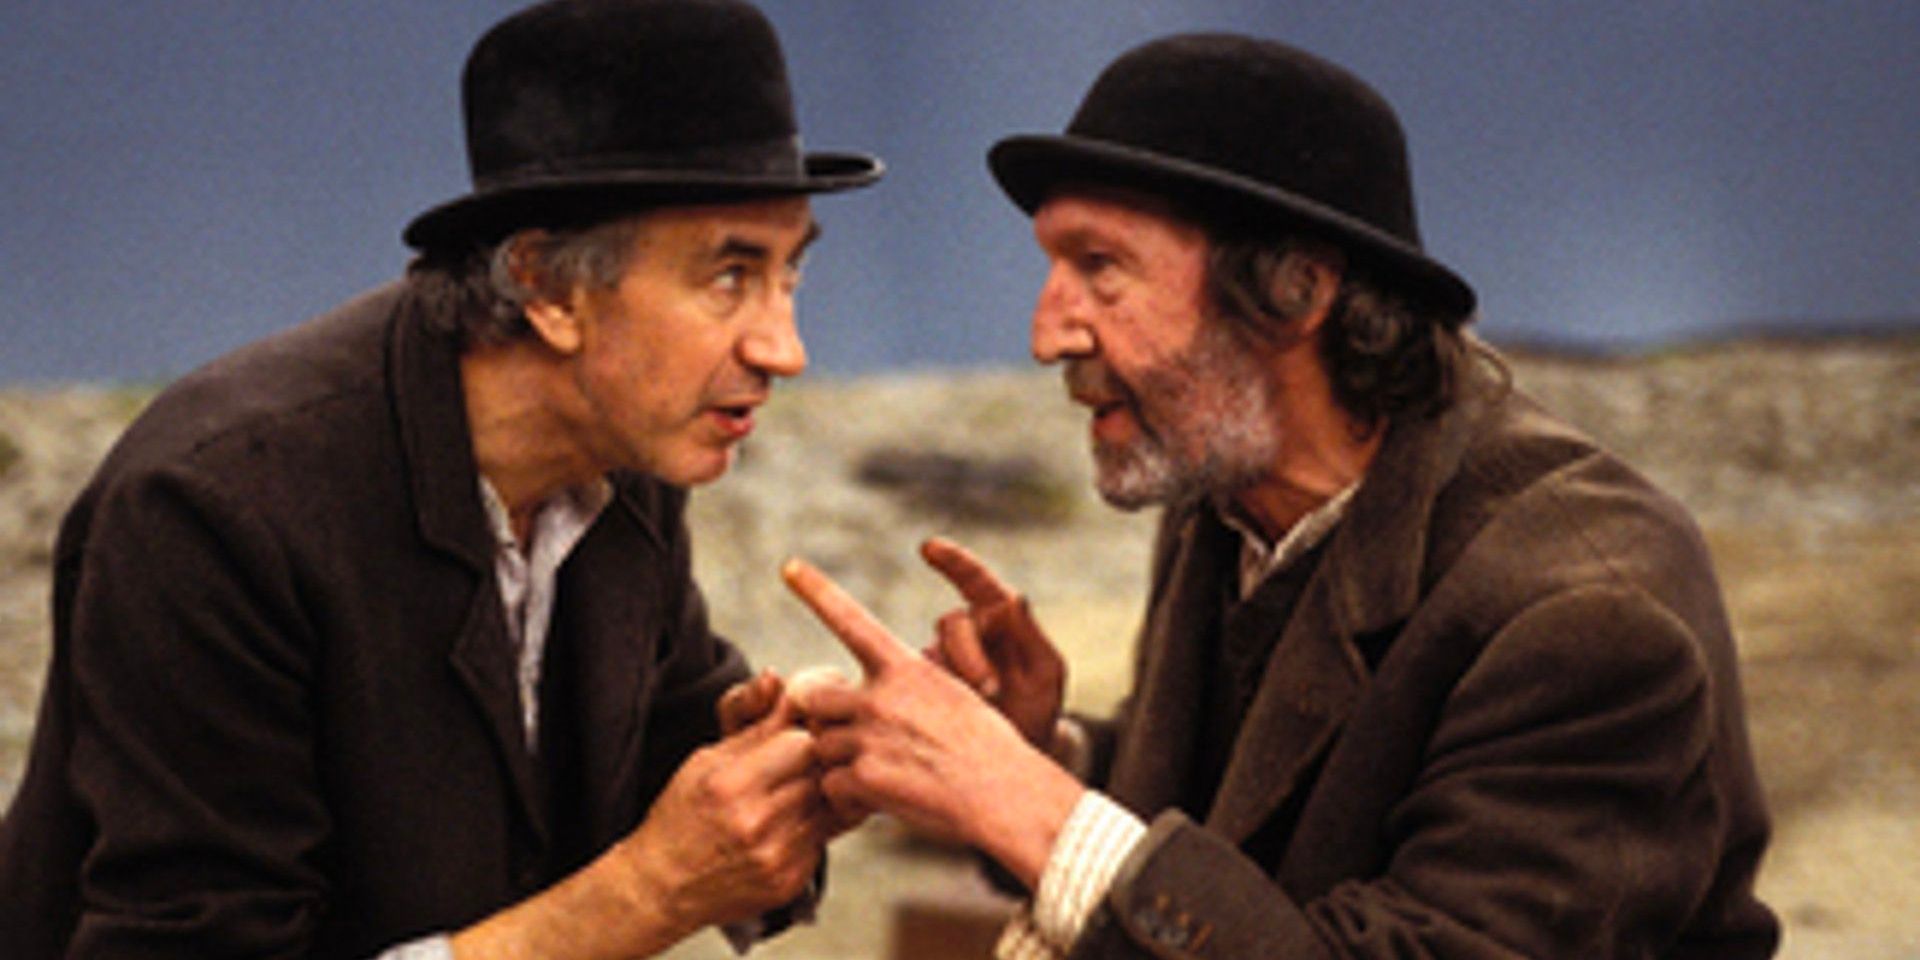 Two old tramps bicker with each other as they wait for a mysterious man in 'Waiting for Godot'.